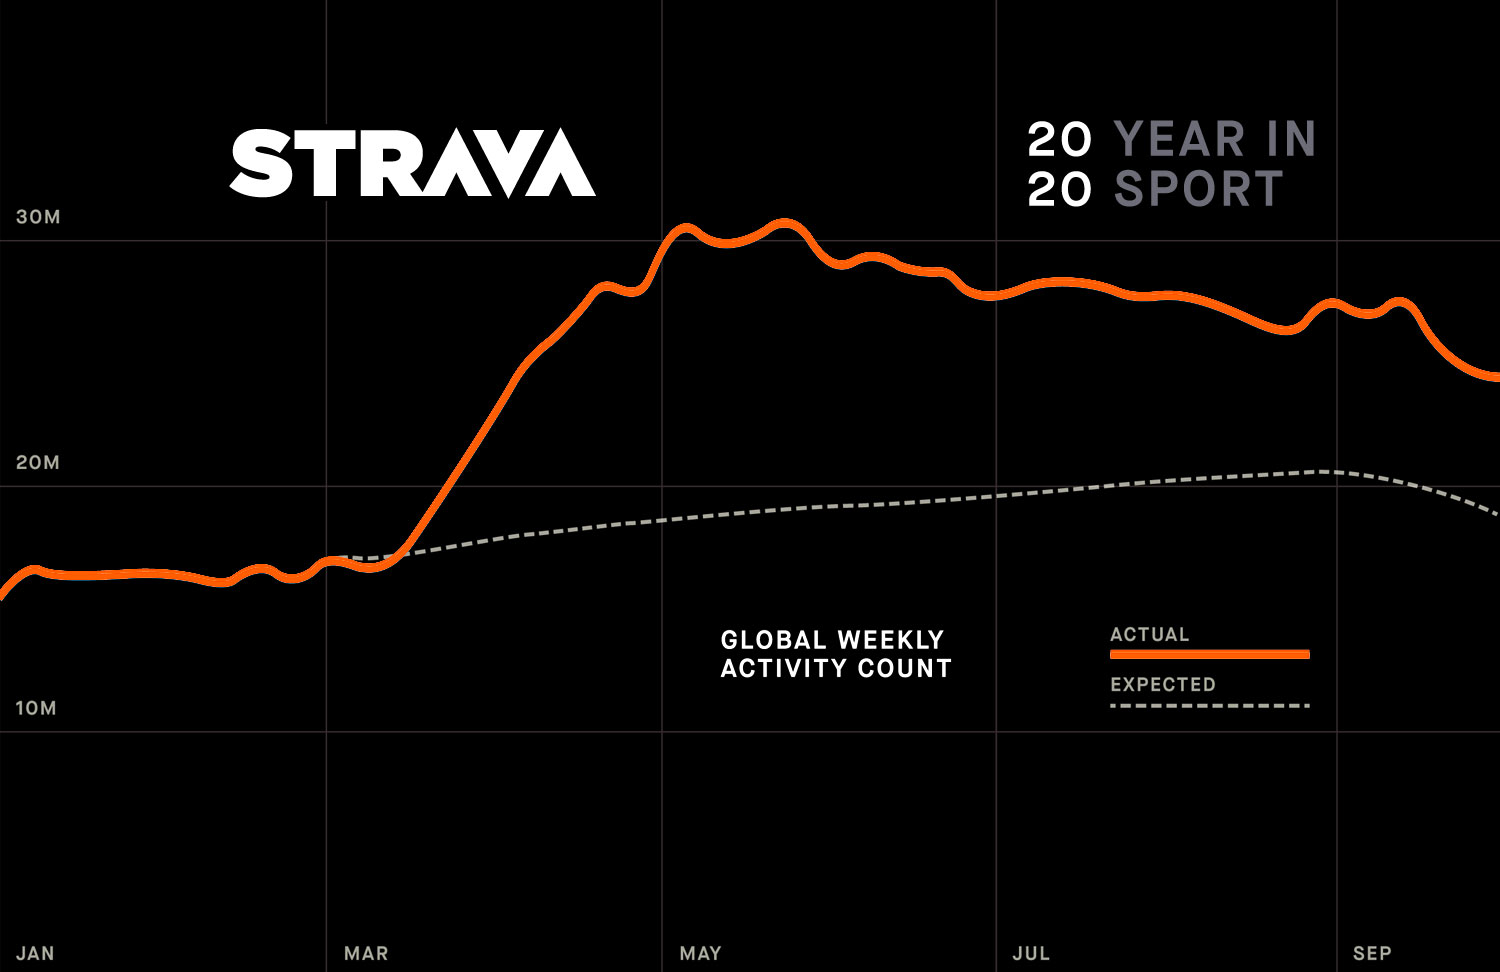 2020 Strava Year in Sport data uncovers active lifestyle in a pandemic